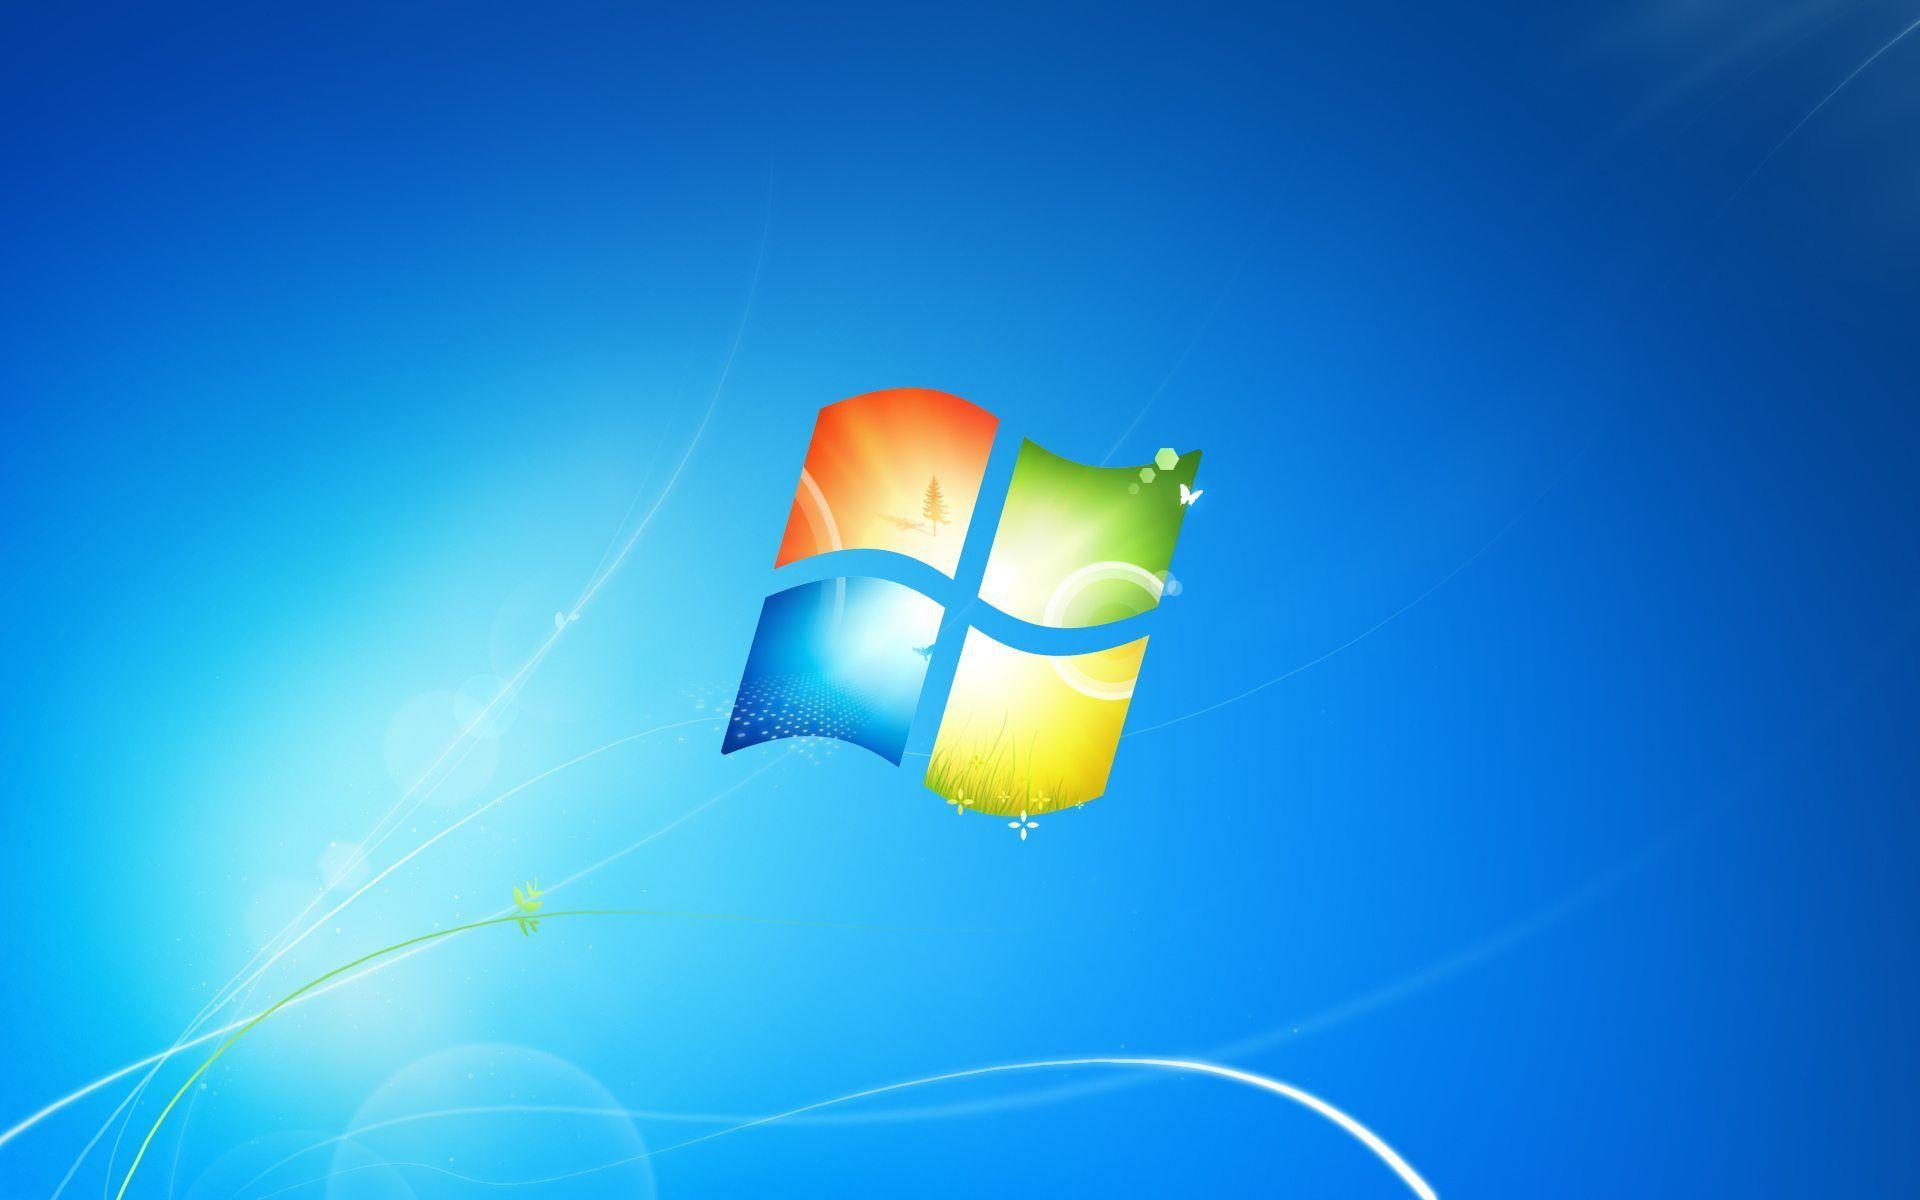 Windows 7 Wallpapers - Top Free Windows 7 Backgrounds - WallpaperAccess